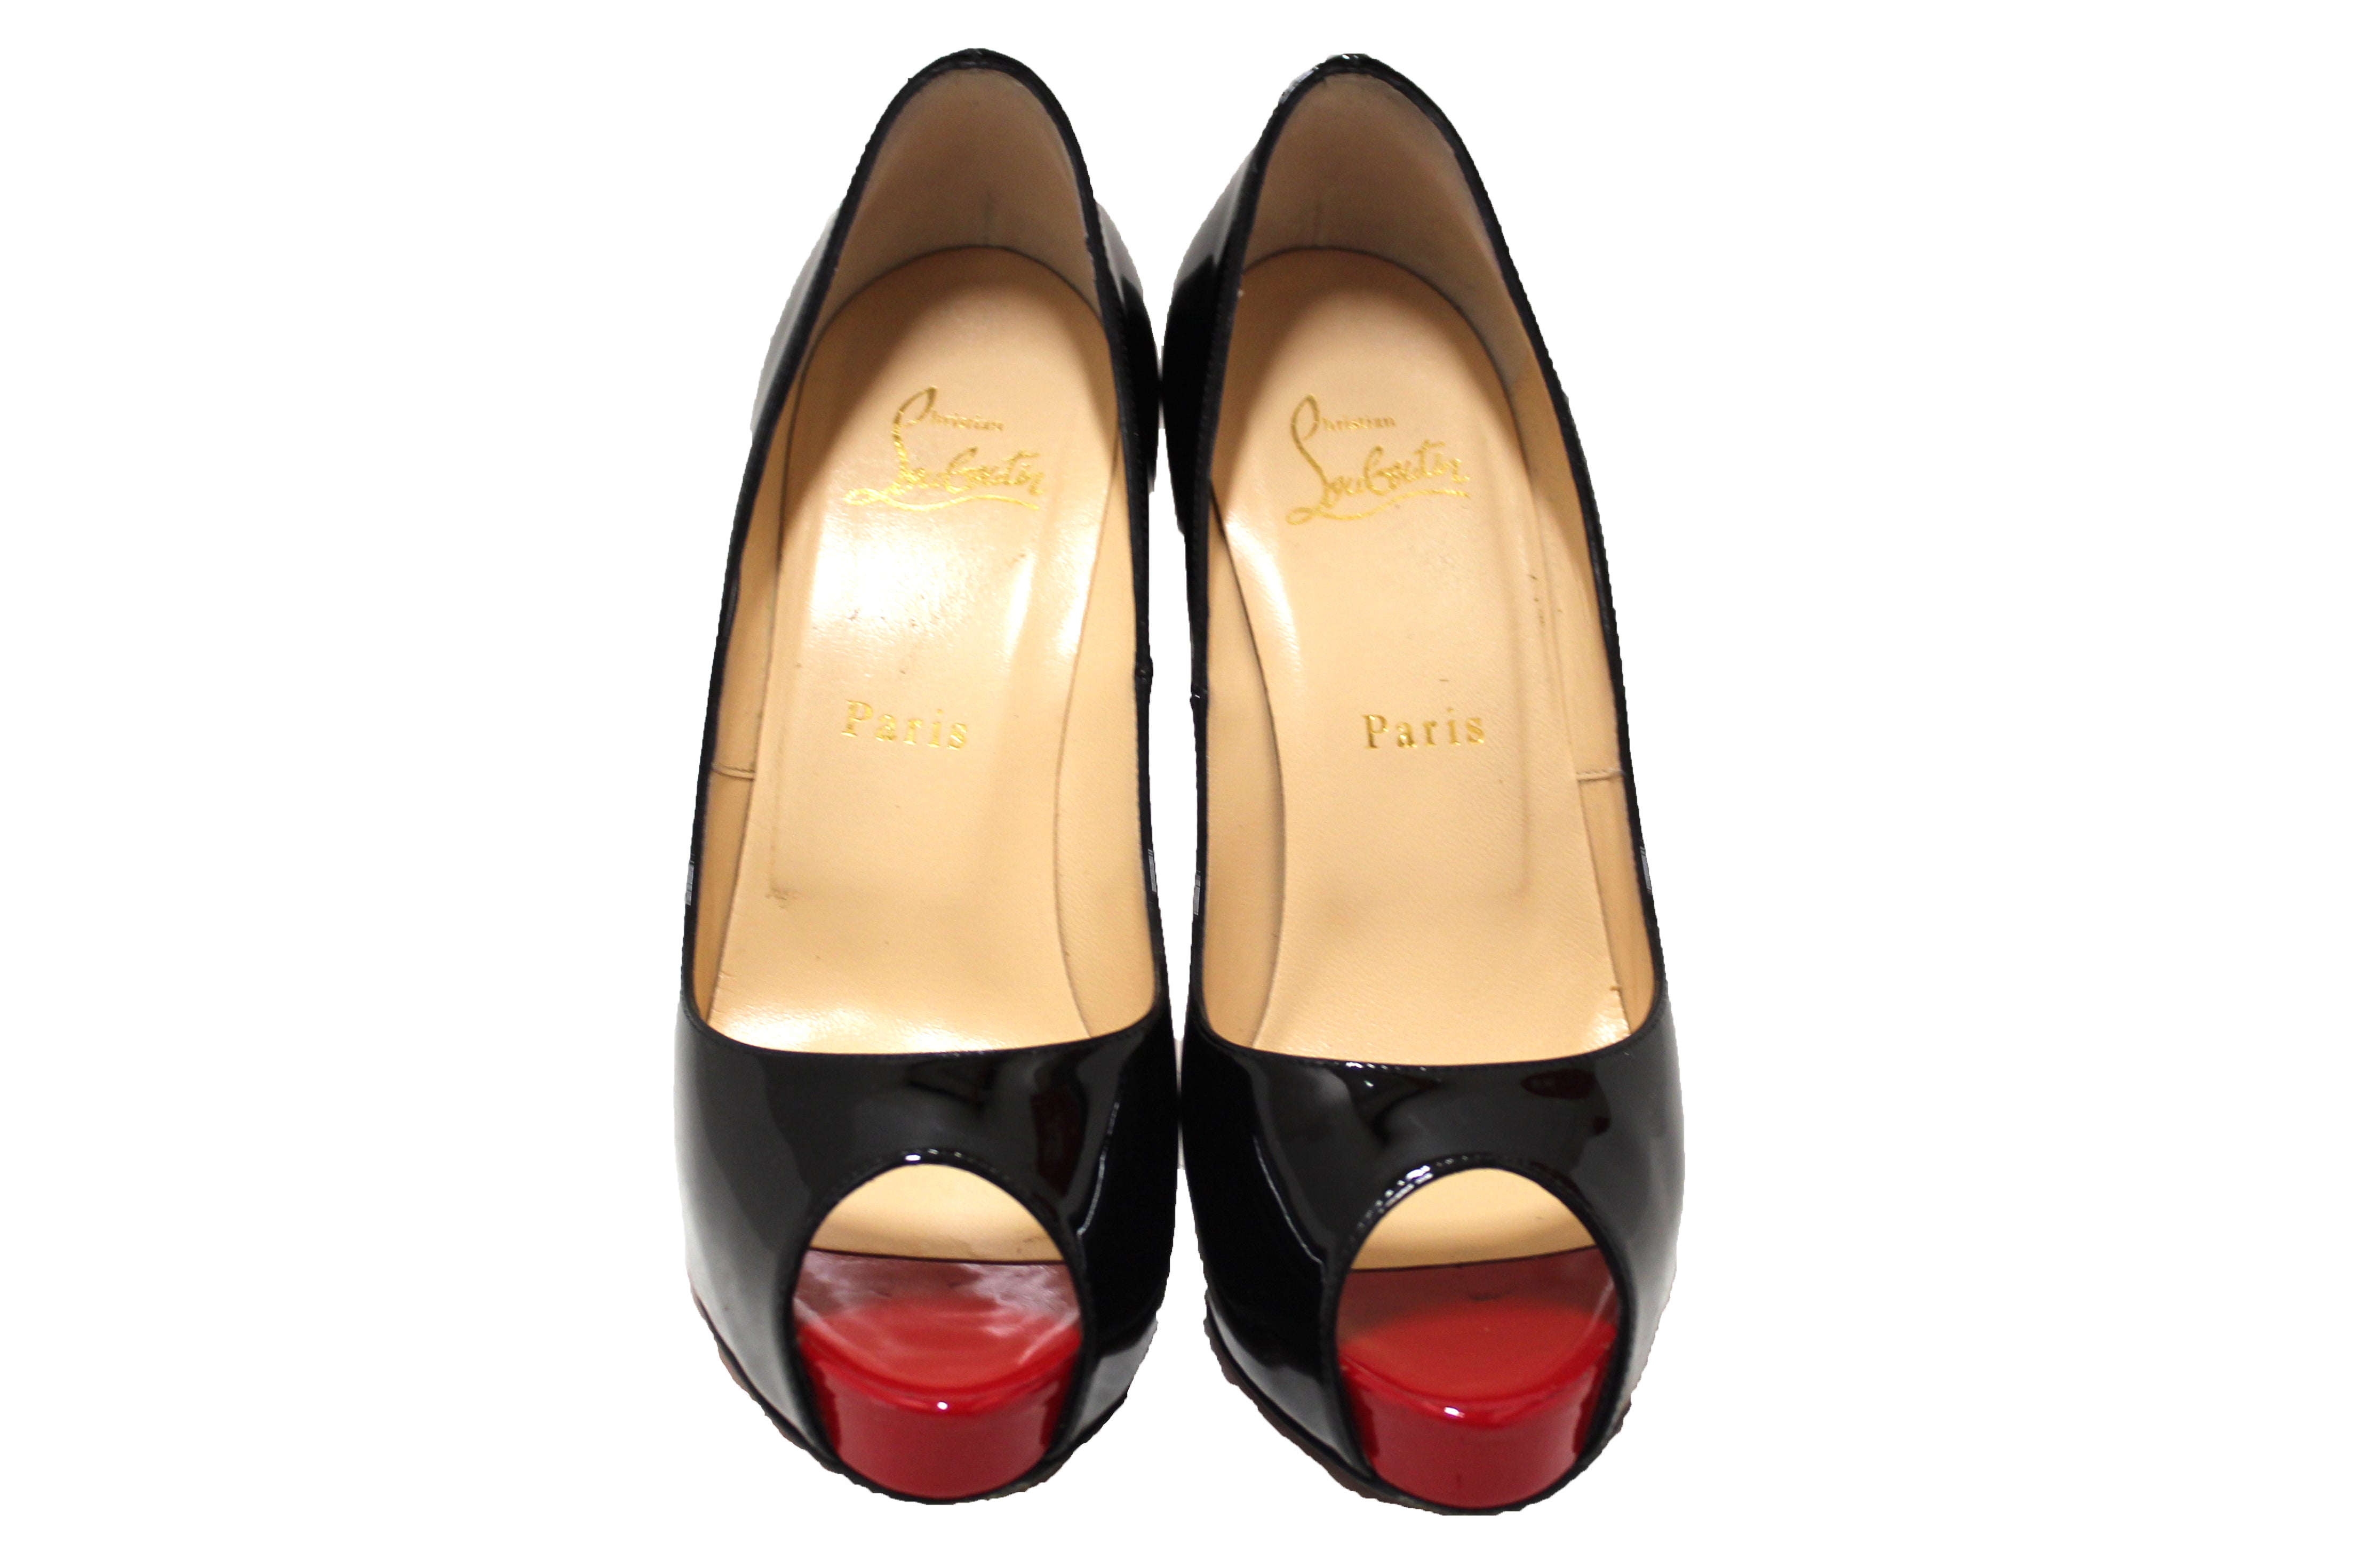 Authentic Christian Louboutin Black Patent Leather New Very Prive 120 Pumps Size 37